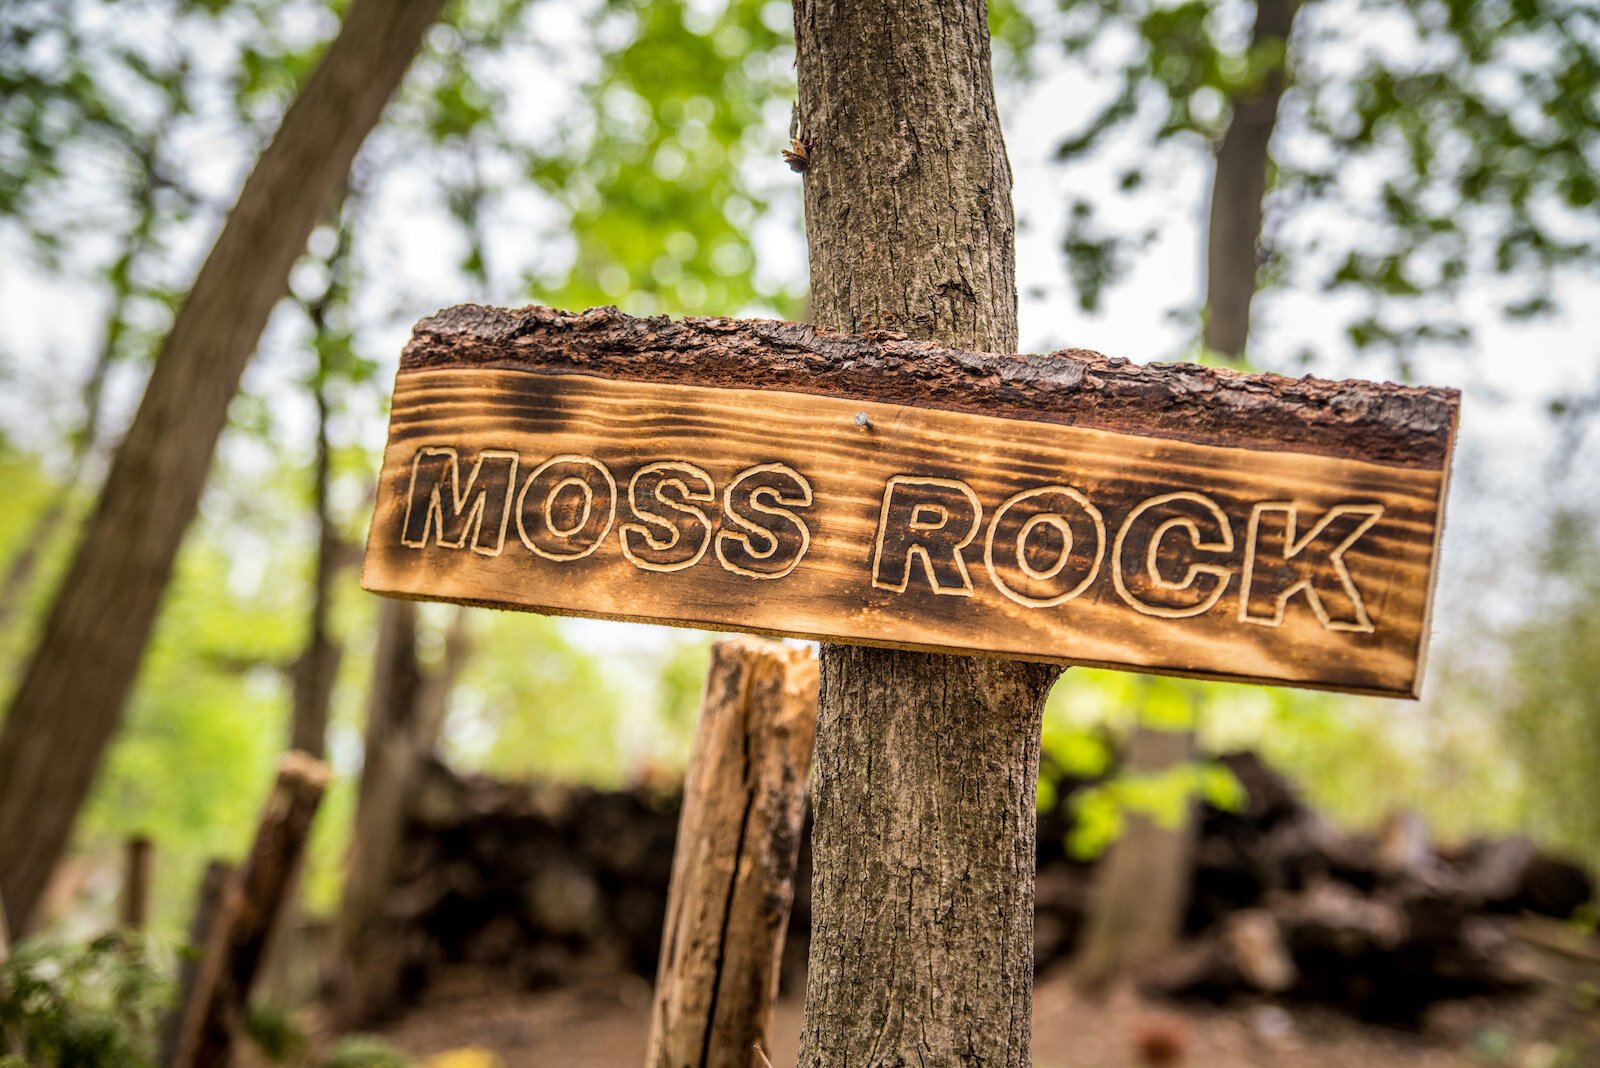 The children's new play area, Moss Rock.